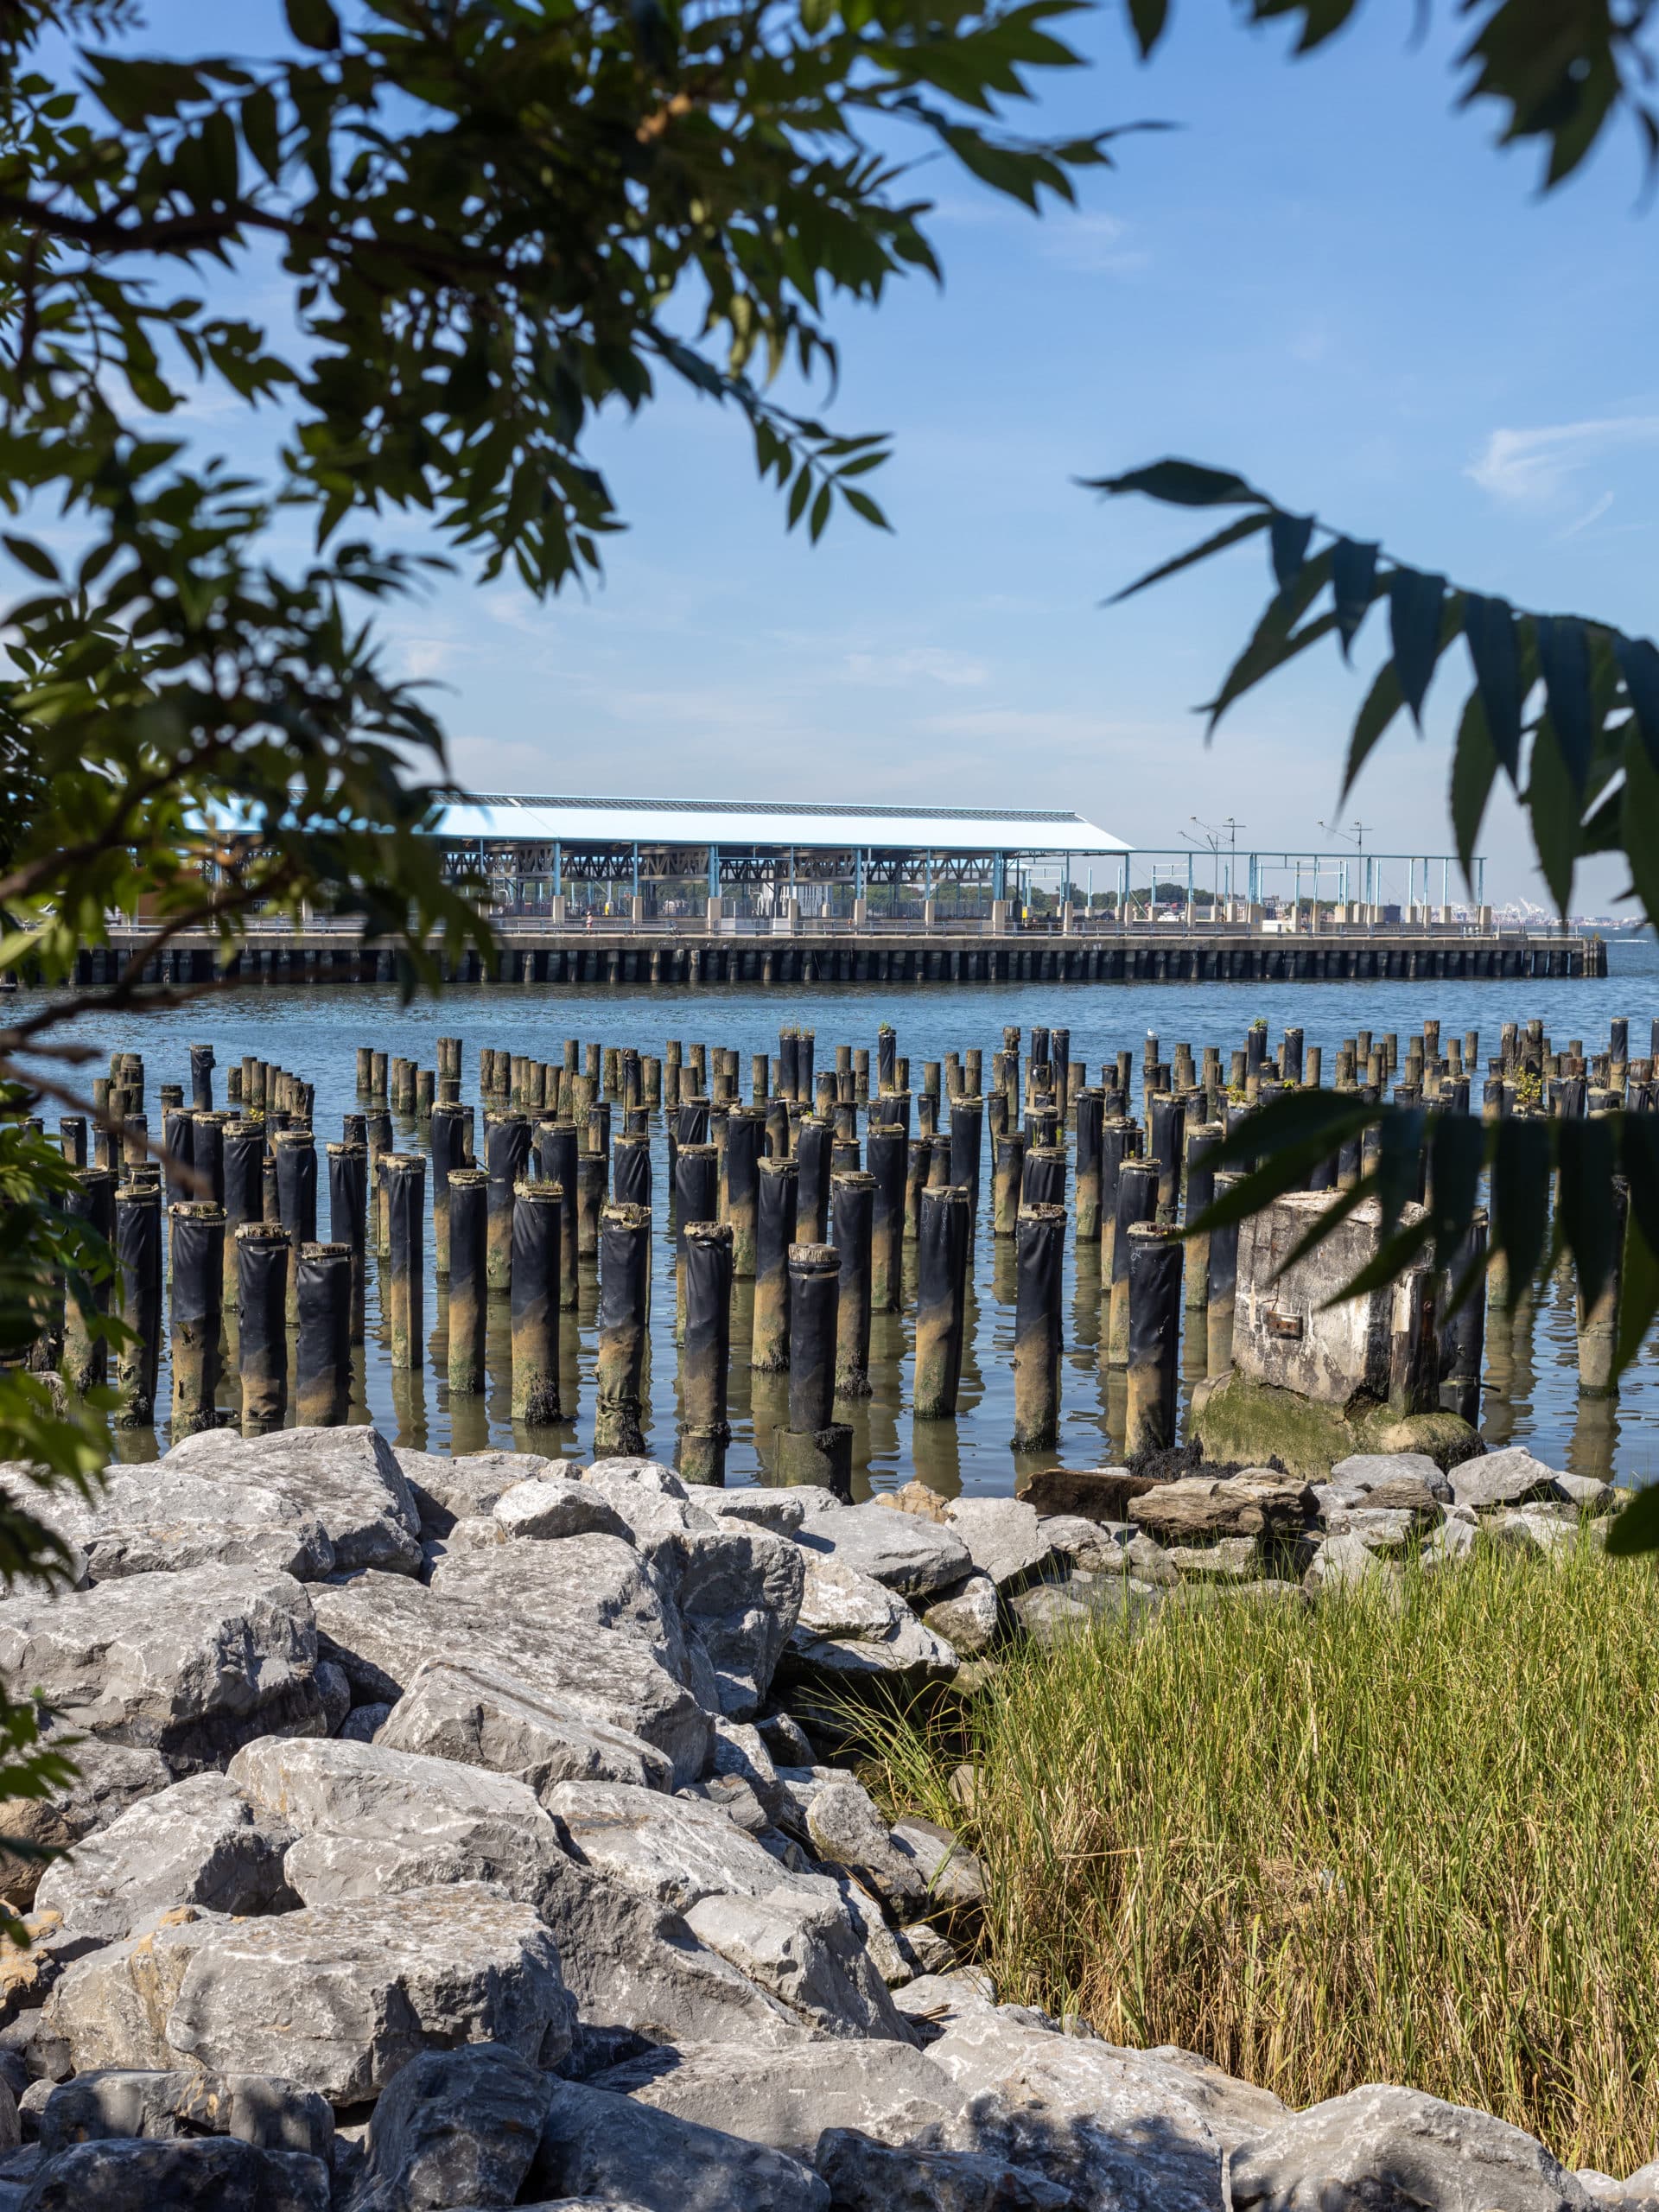 Pier 1 Pile Field and Salt Marsh with a view of Pier 2 in the background on a sunny day.